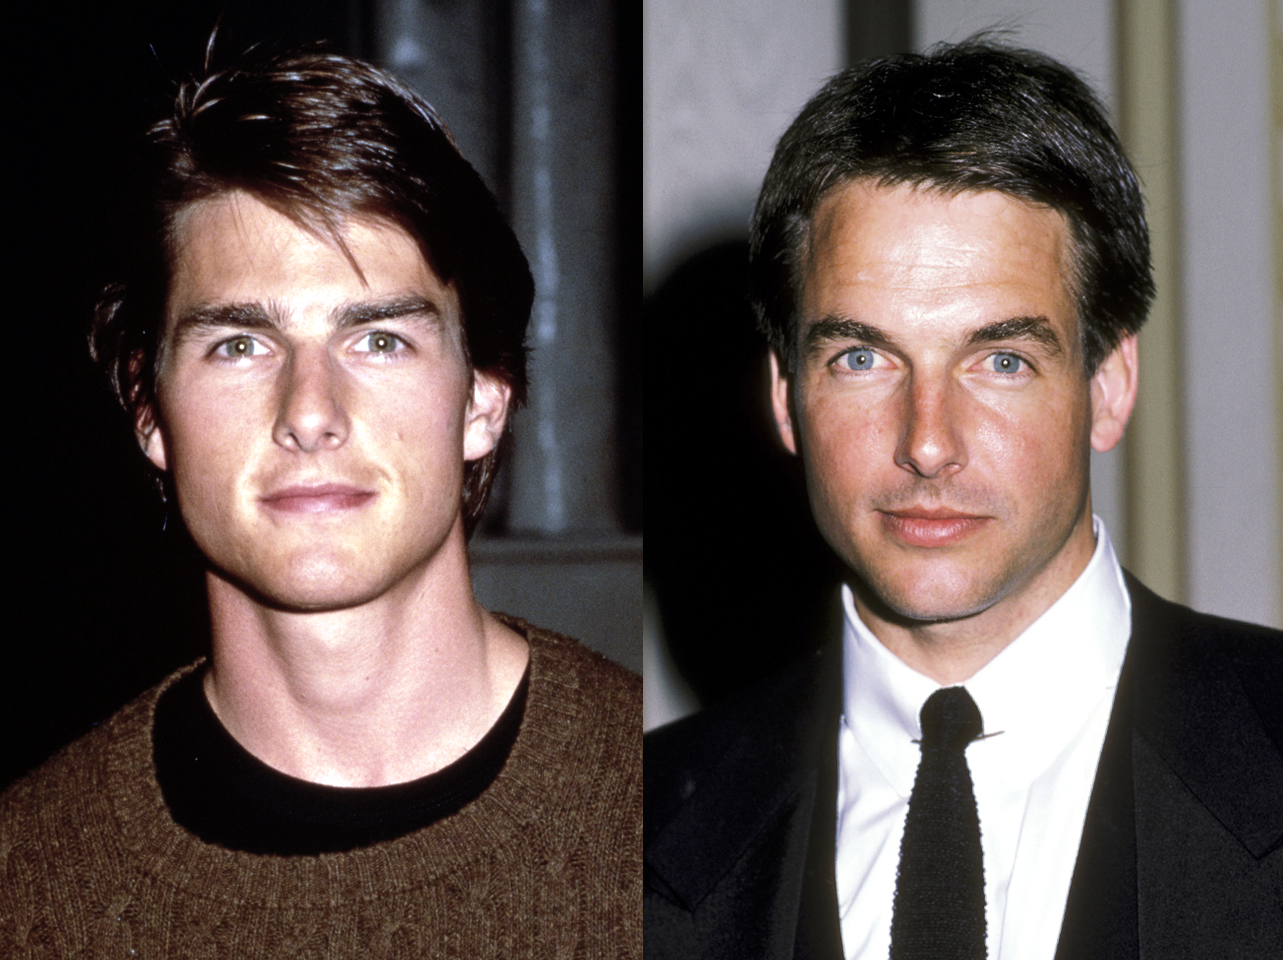 Tom Cruise and Mark Harmon | Source: Getty Images